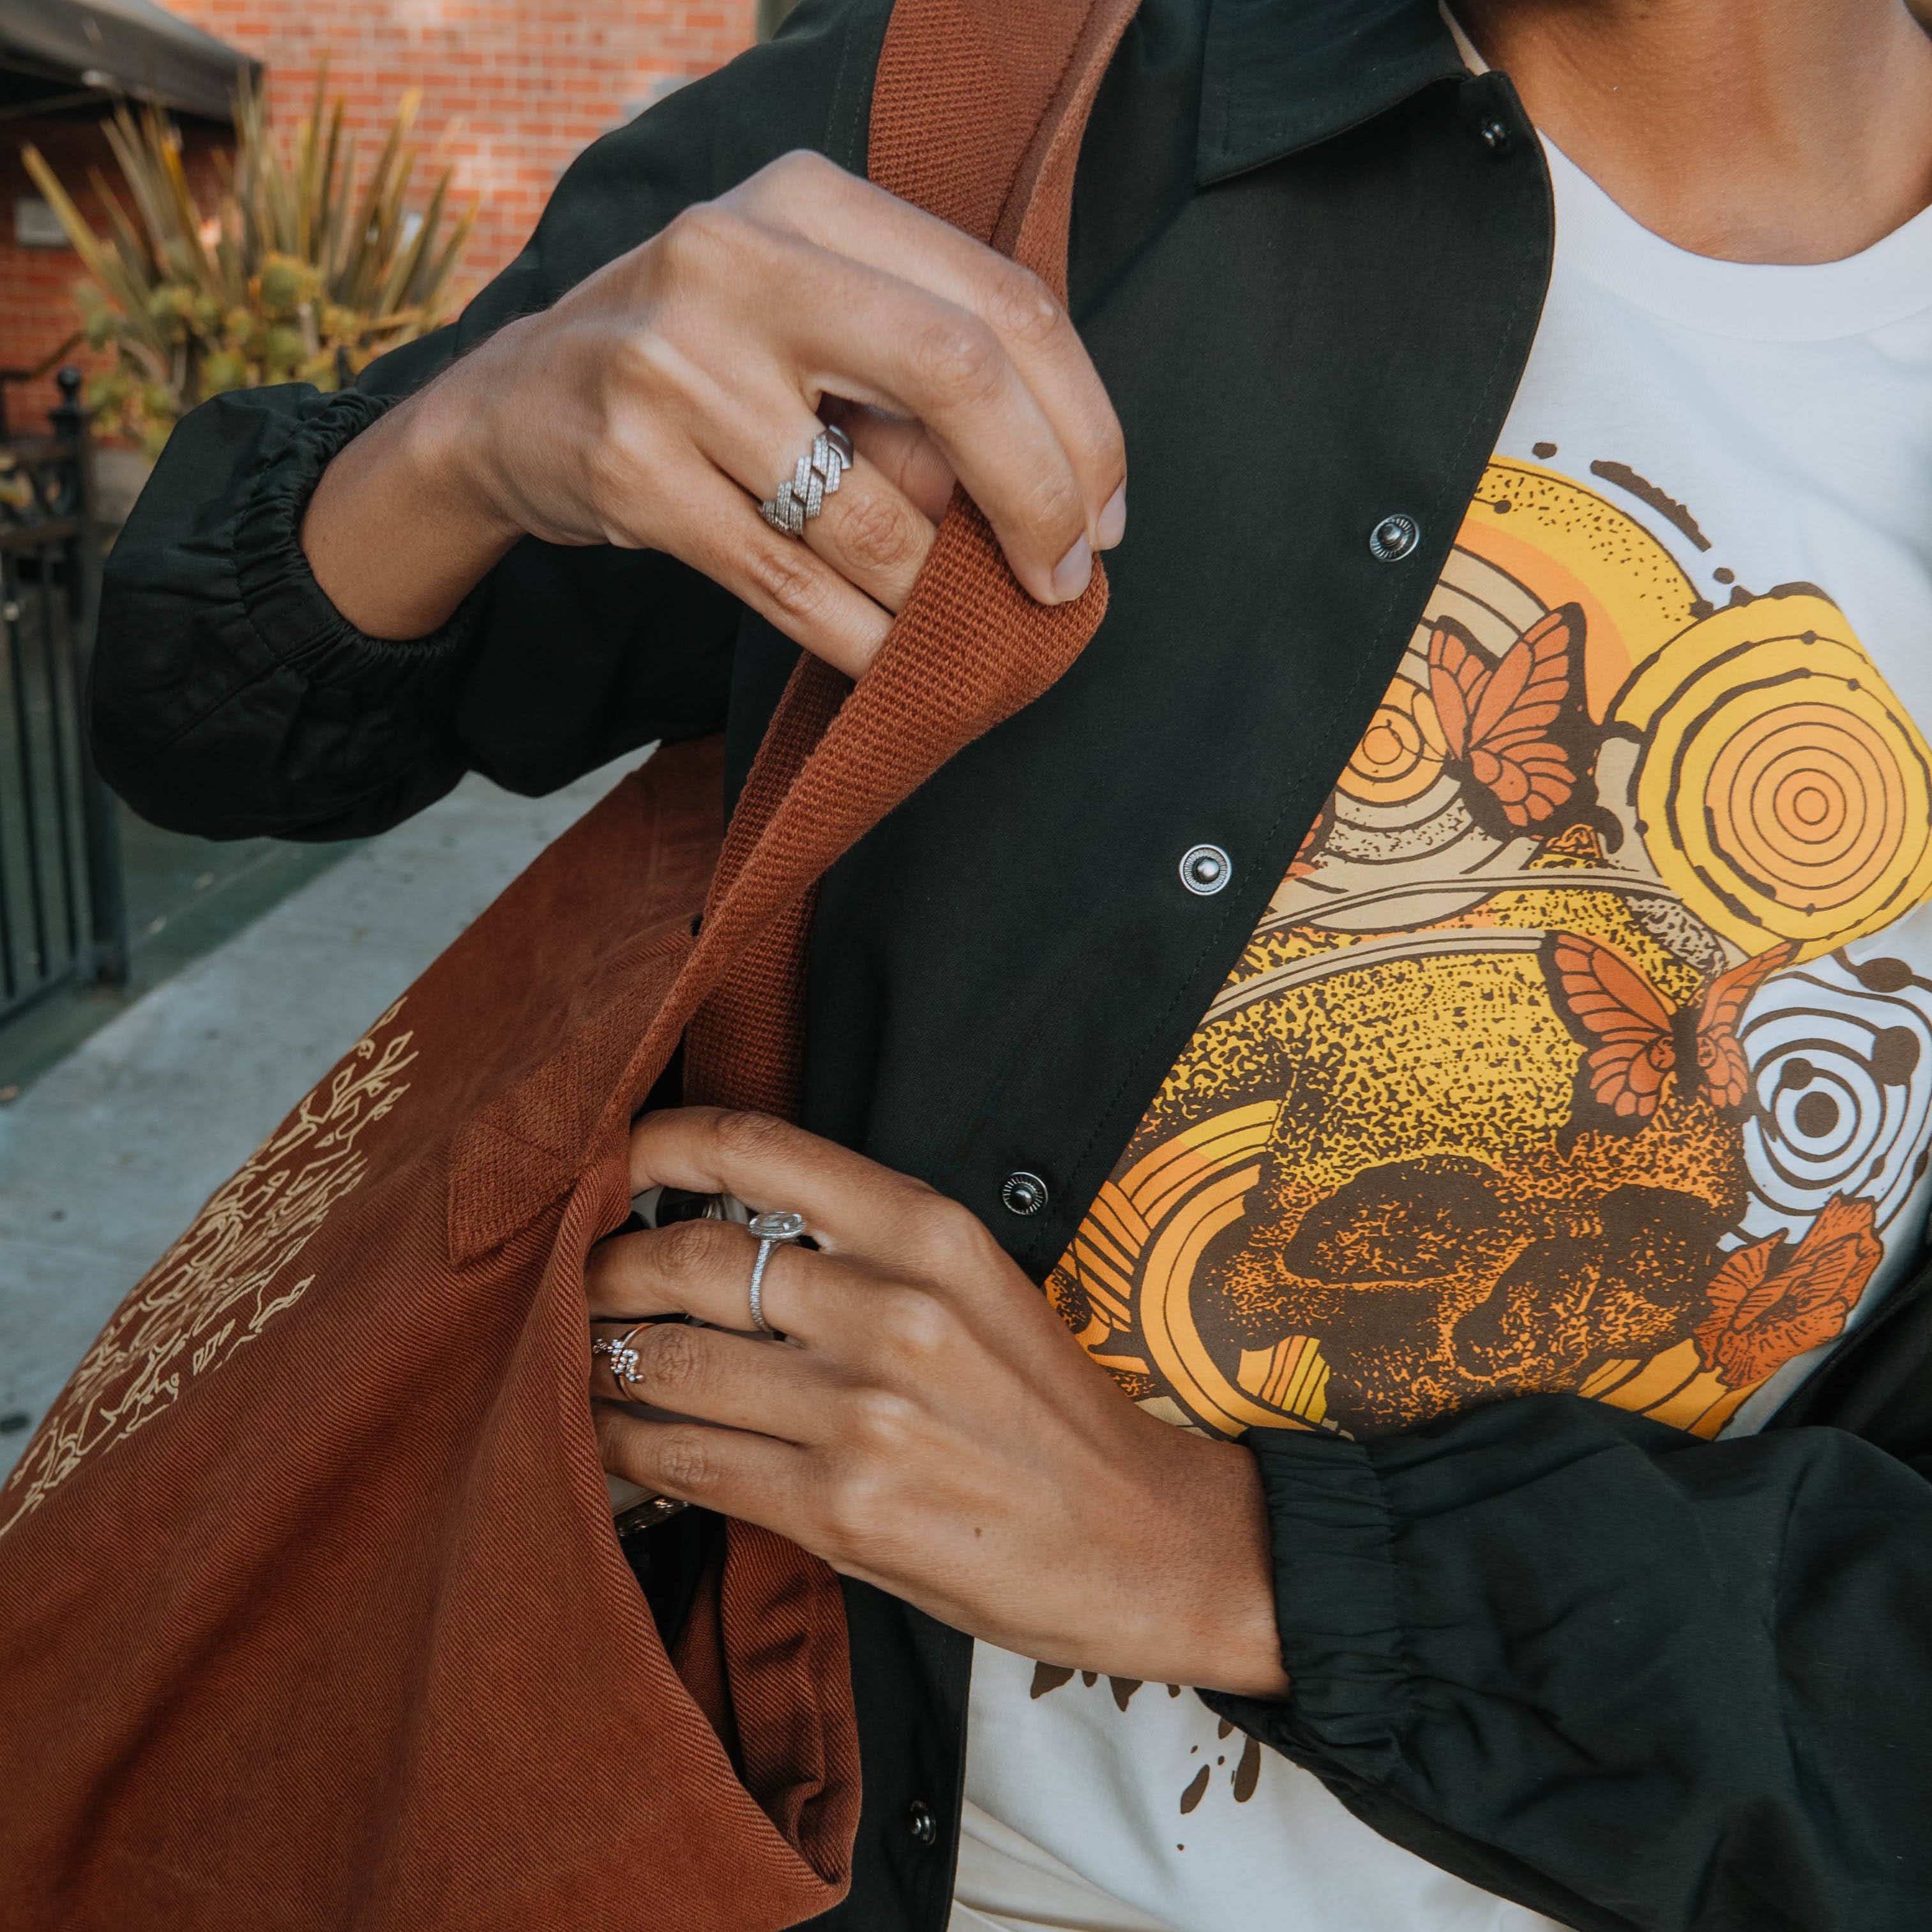 Woman (but you can't see her face) wearing Rebirth tee in natural with skull plus flowers and geometric designs in oranges and yellows, black jacket, and brown tote bag, hands reaching inside bag.